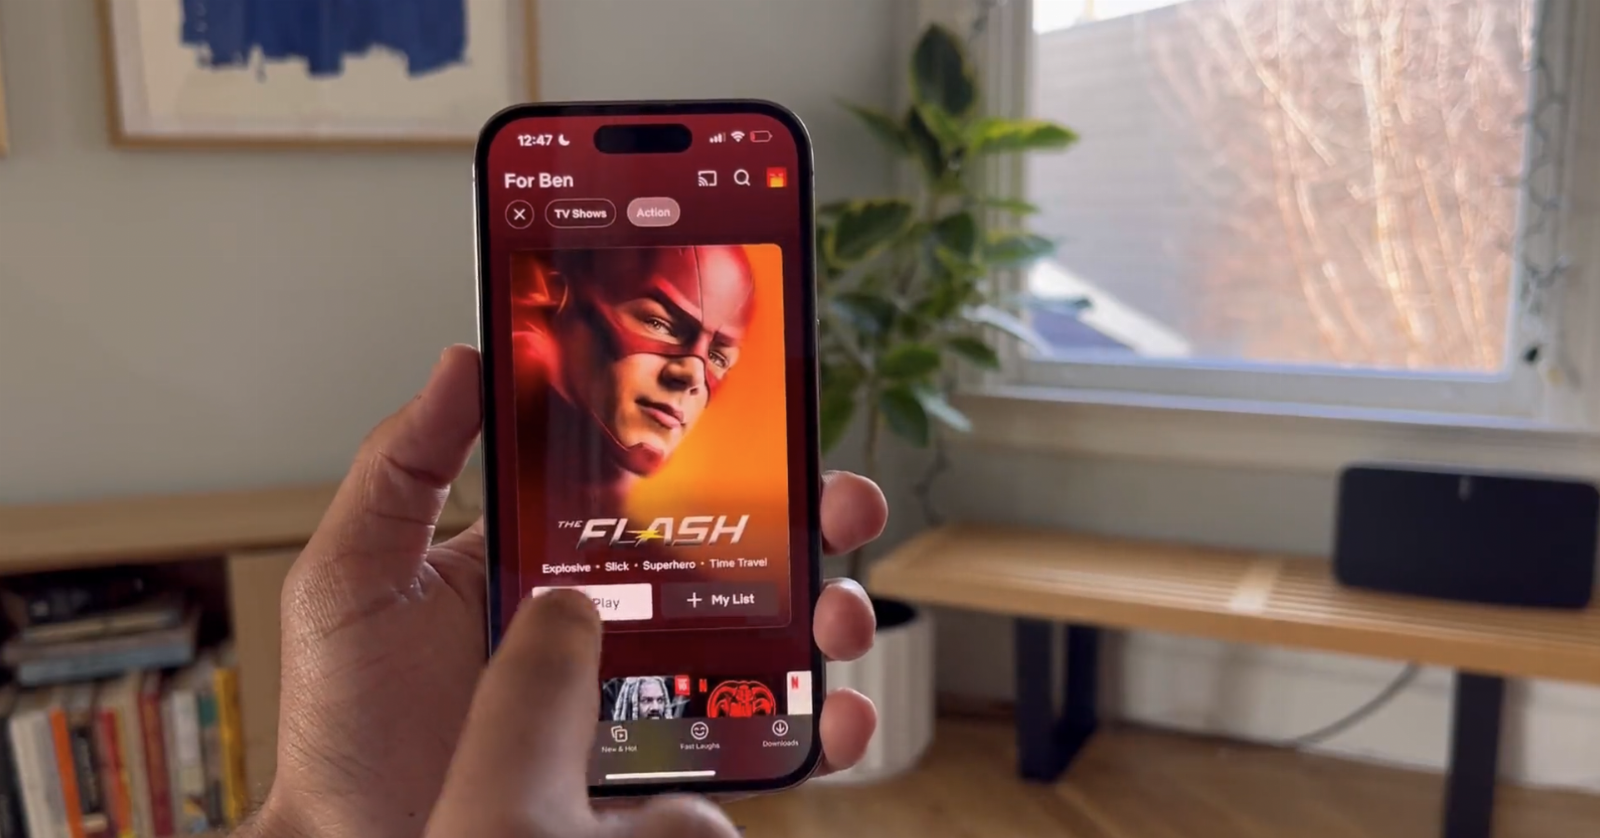 Netflix refreshes its iPhone app with a more fluid design